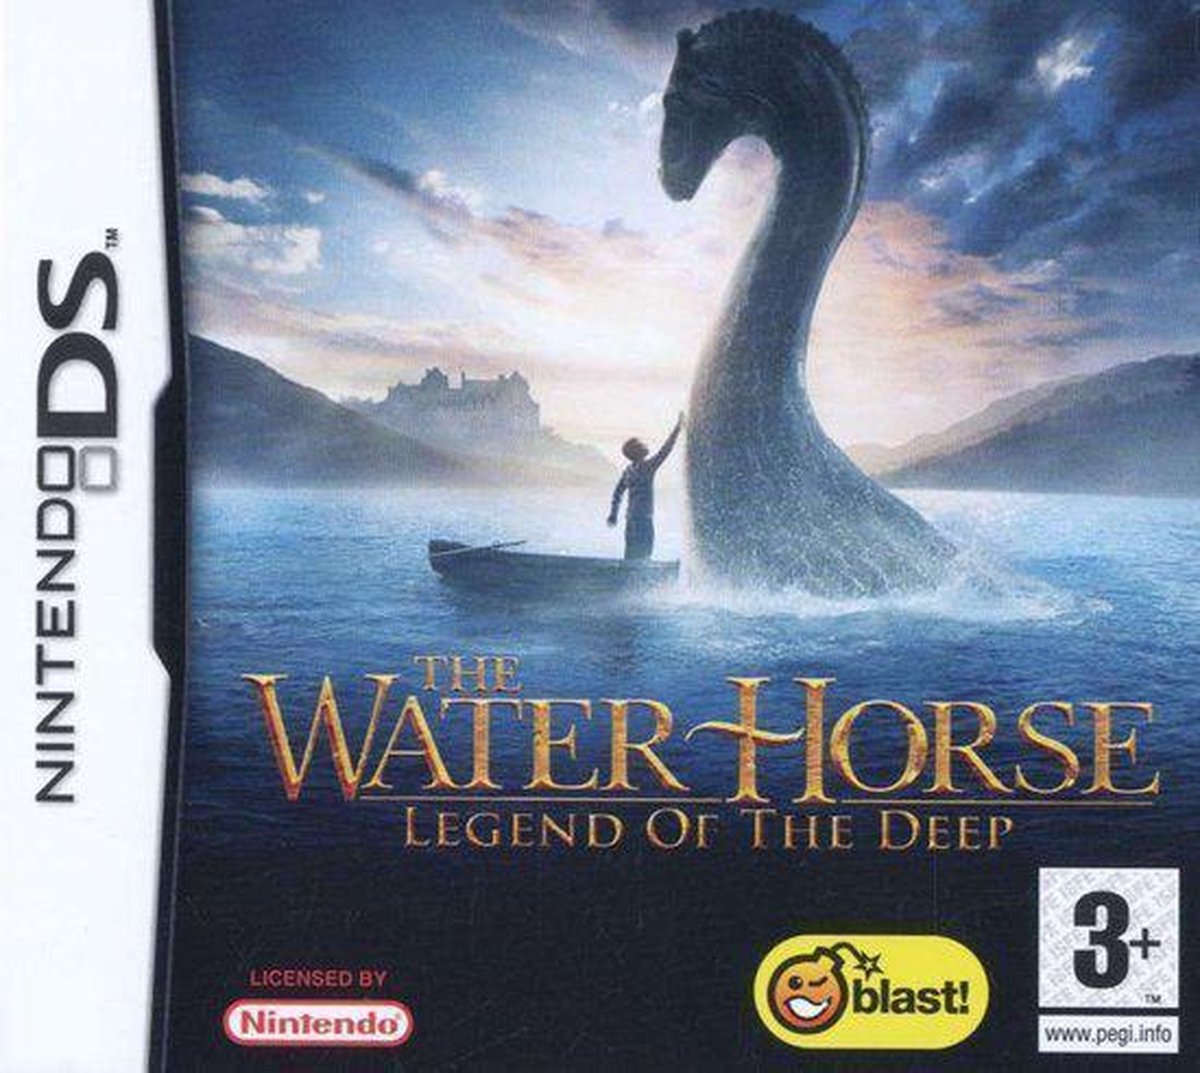 Blast The Water Horse Legend Of The Deep